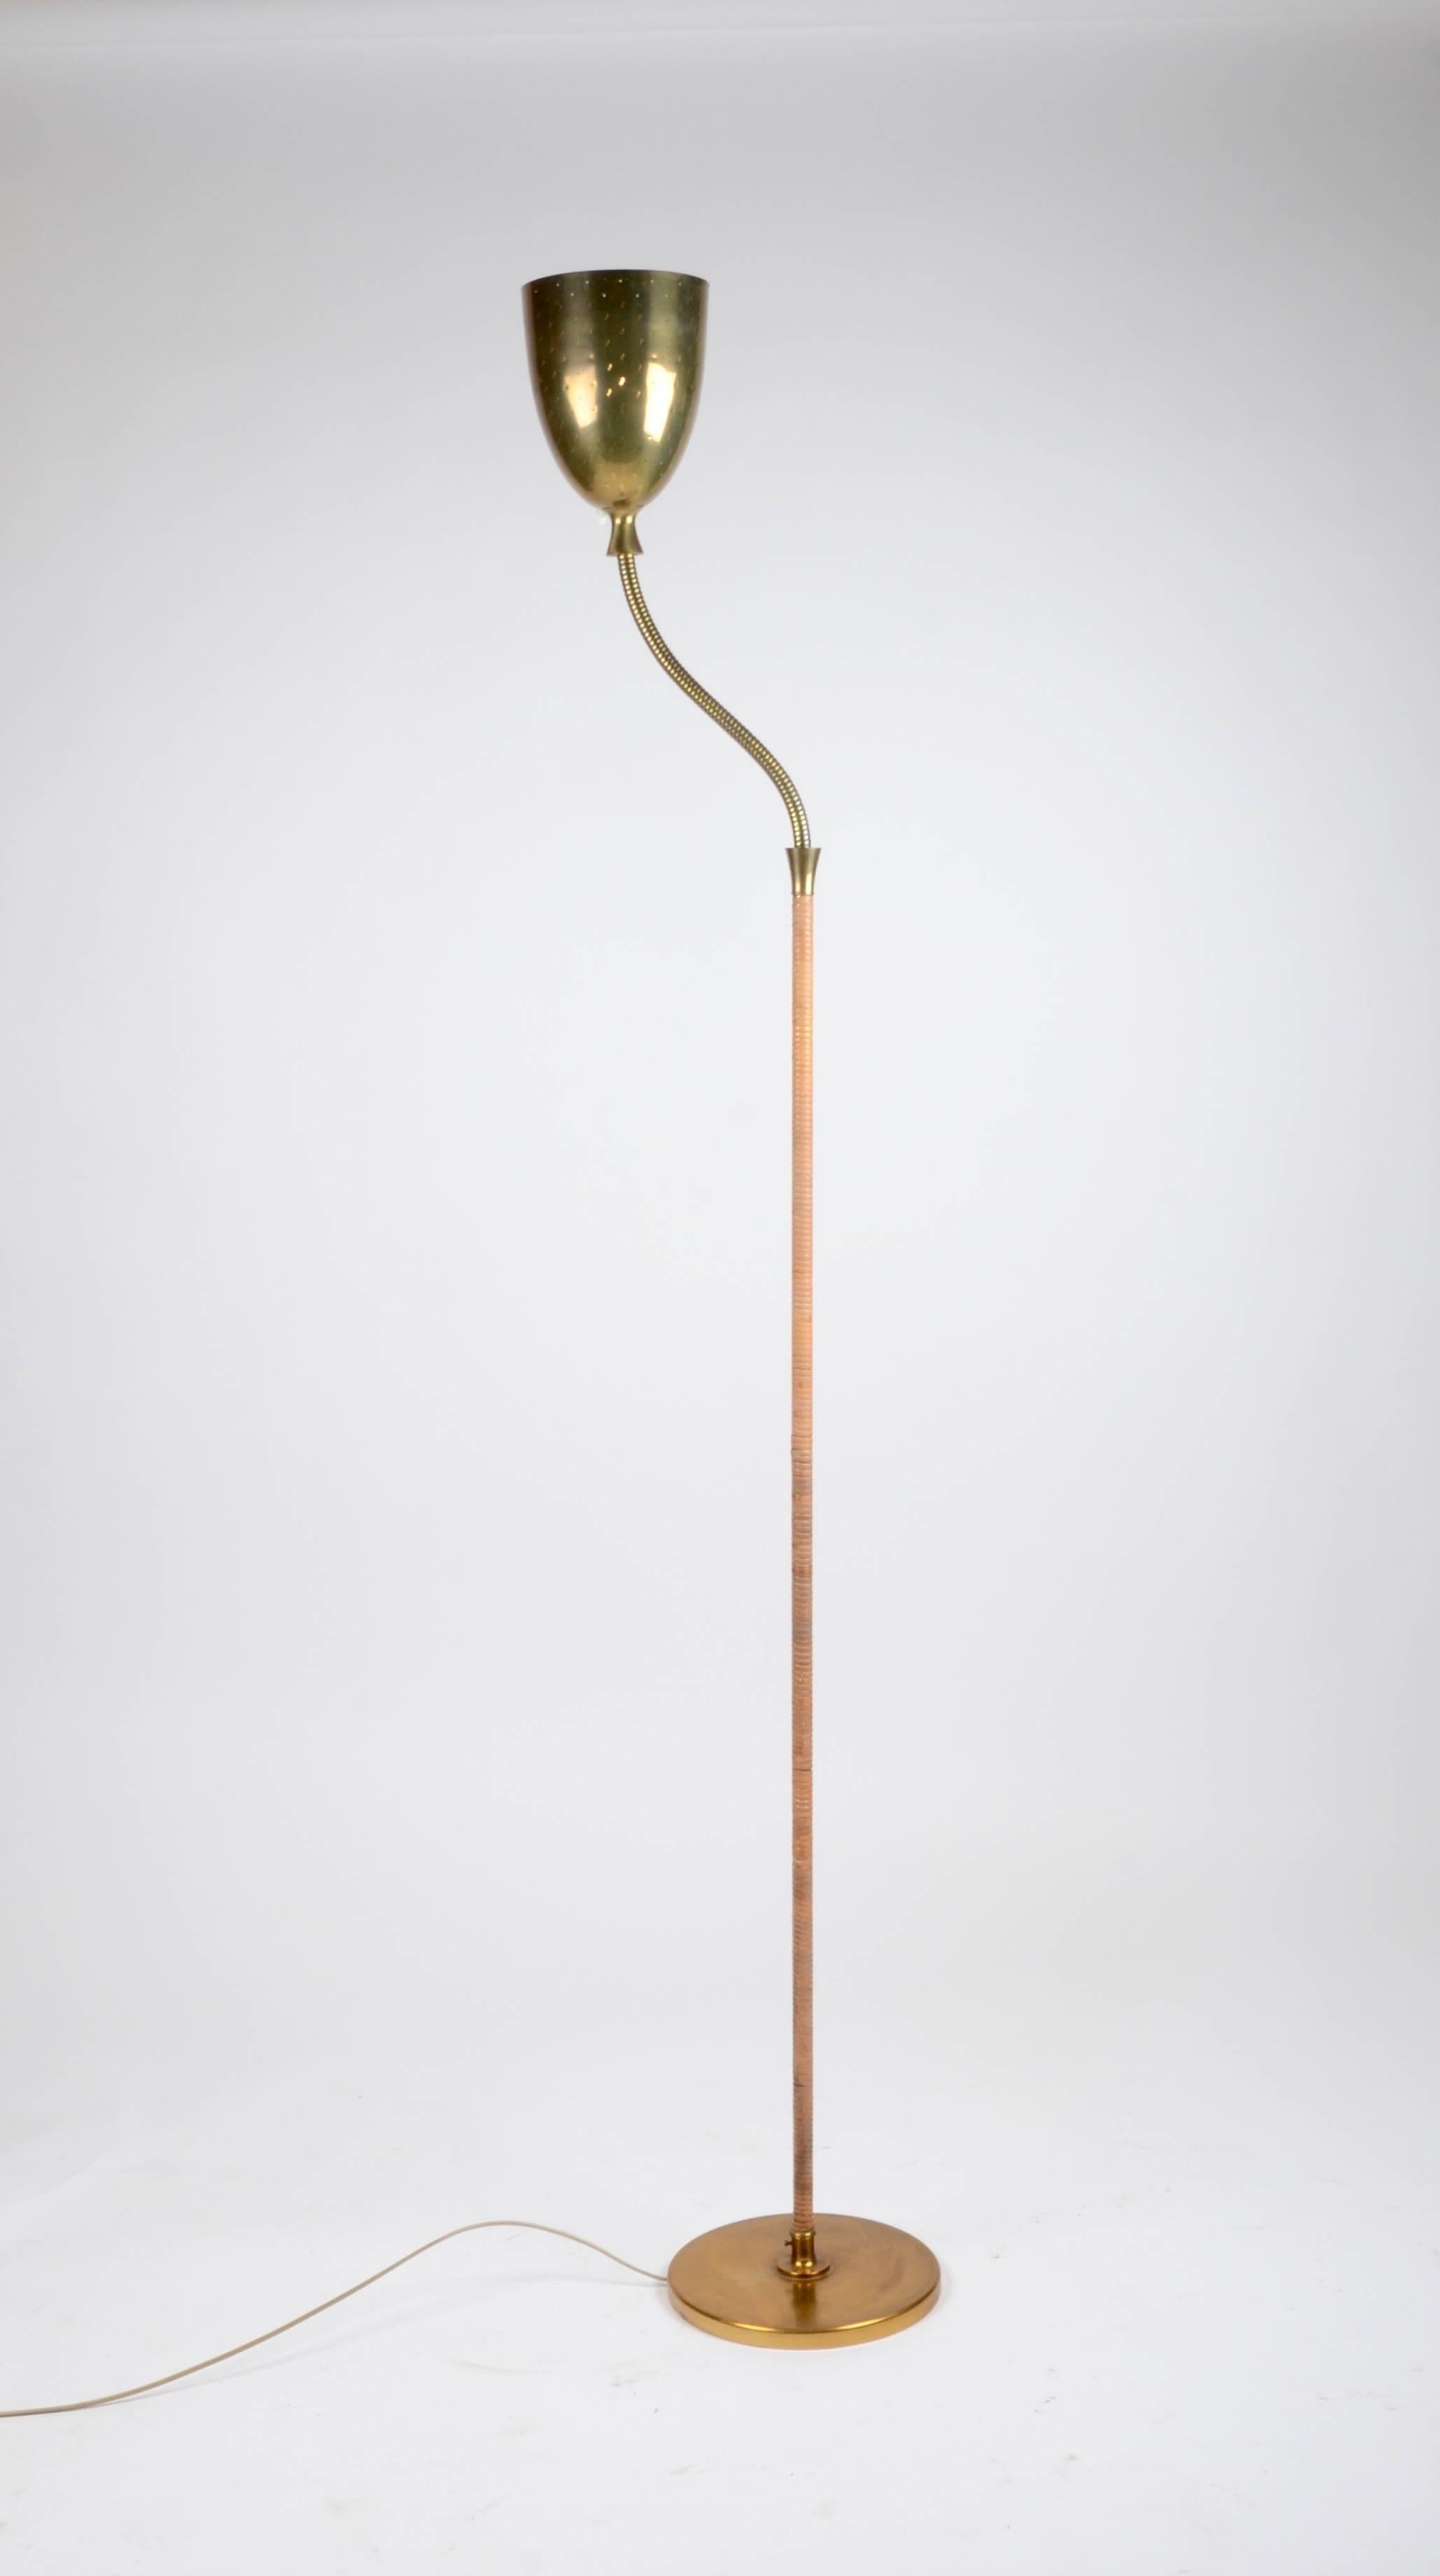 Floor lamp in brass and rattan with adjustable shade. Made by Itsu, Finland, 1950s.